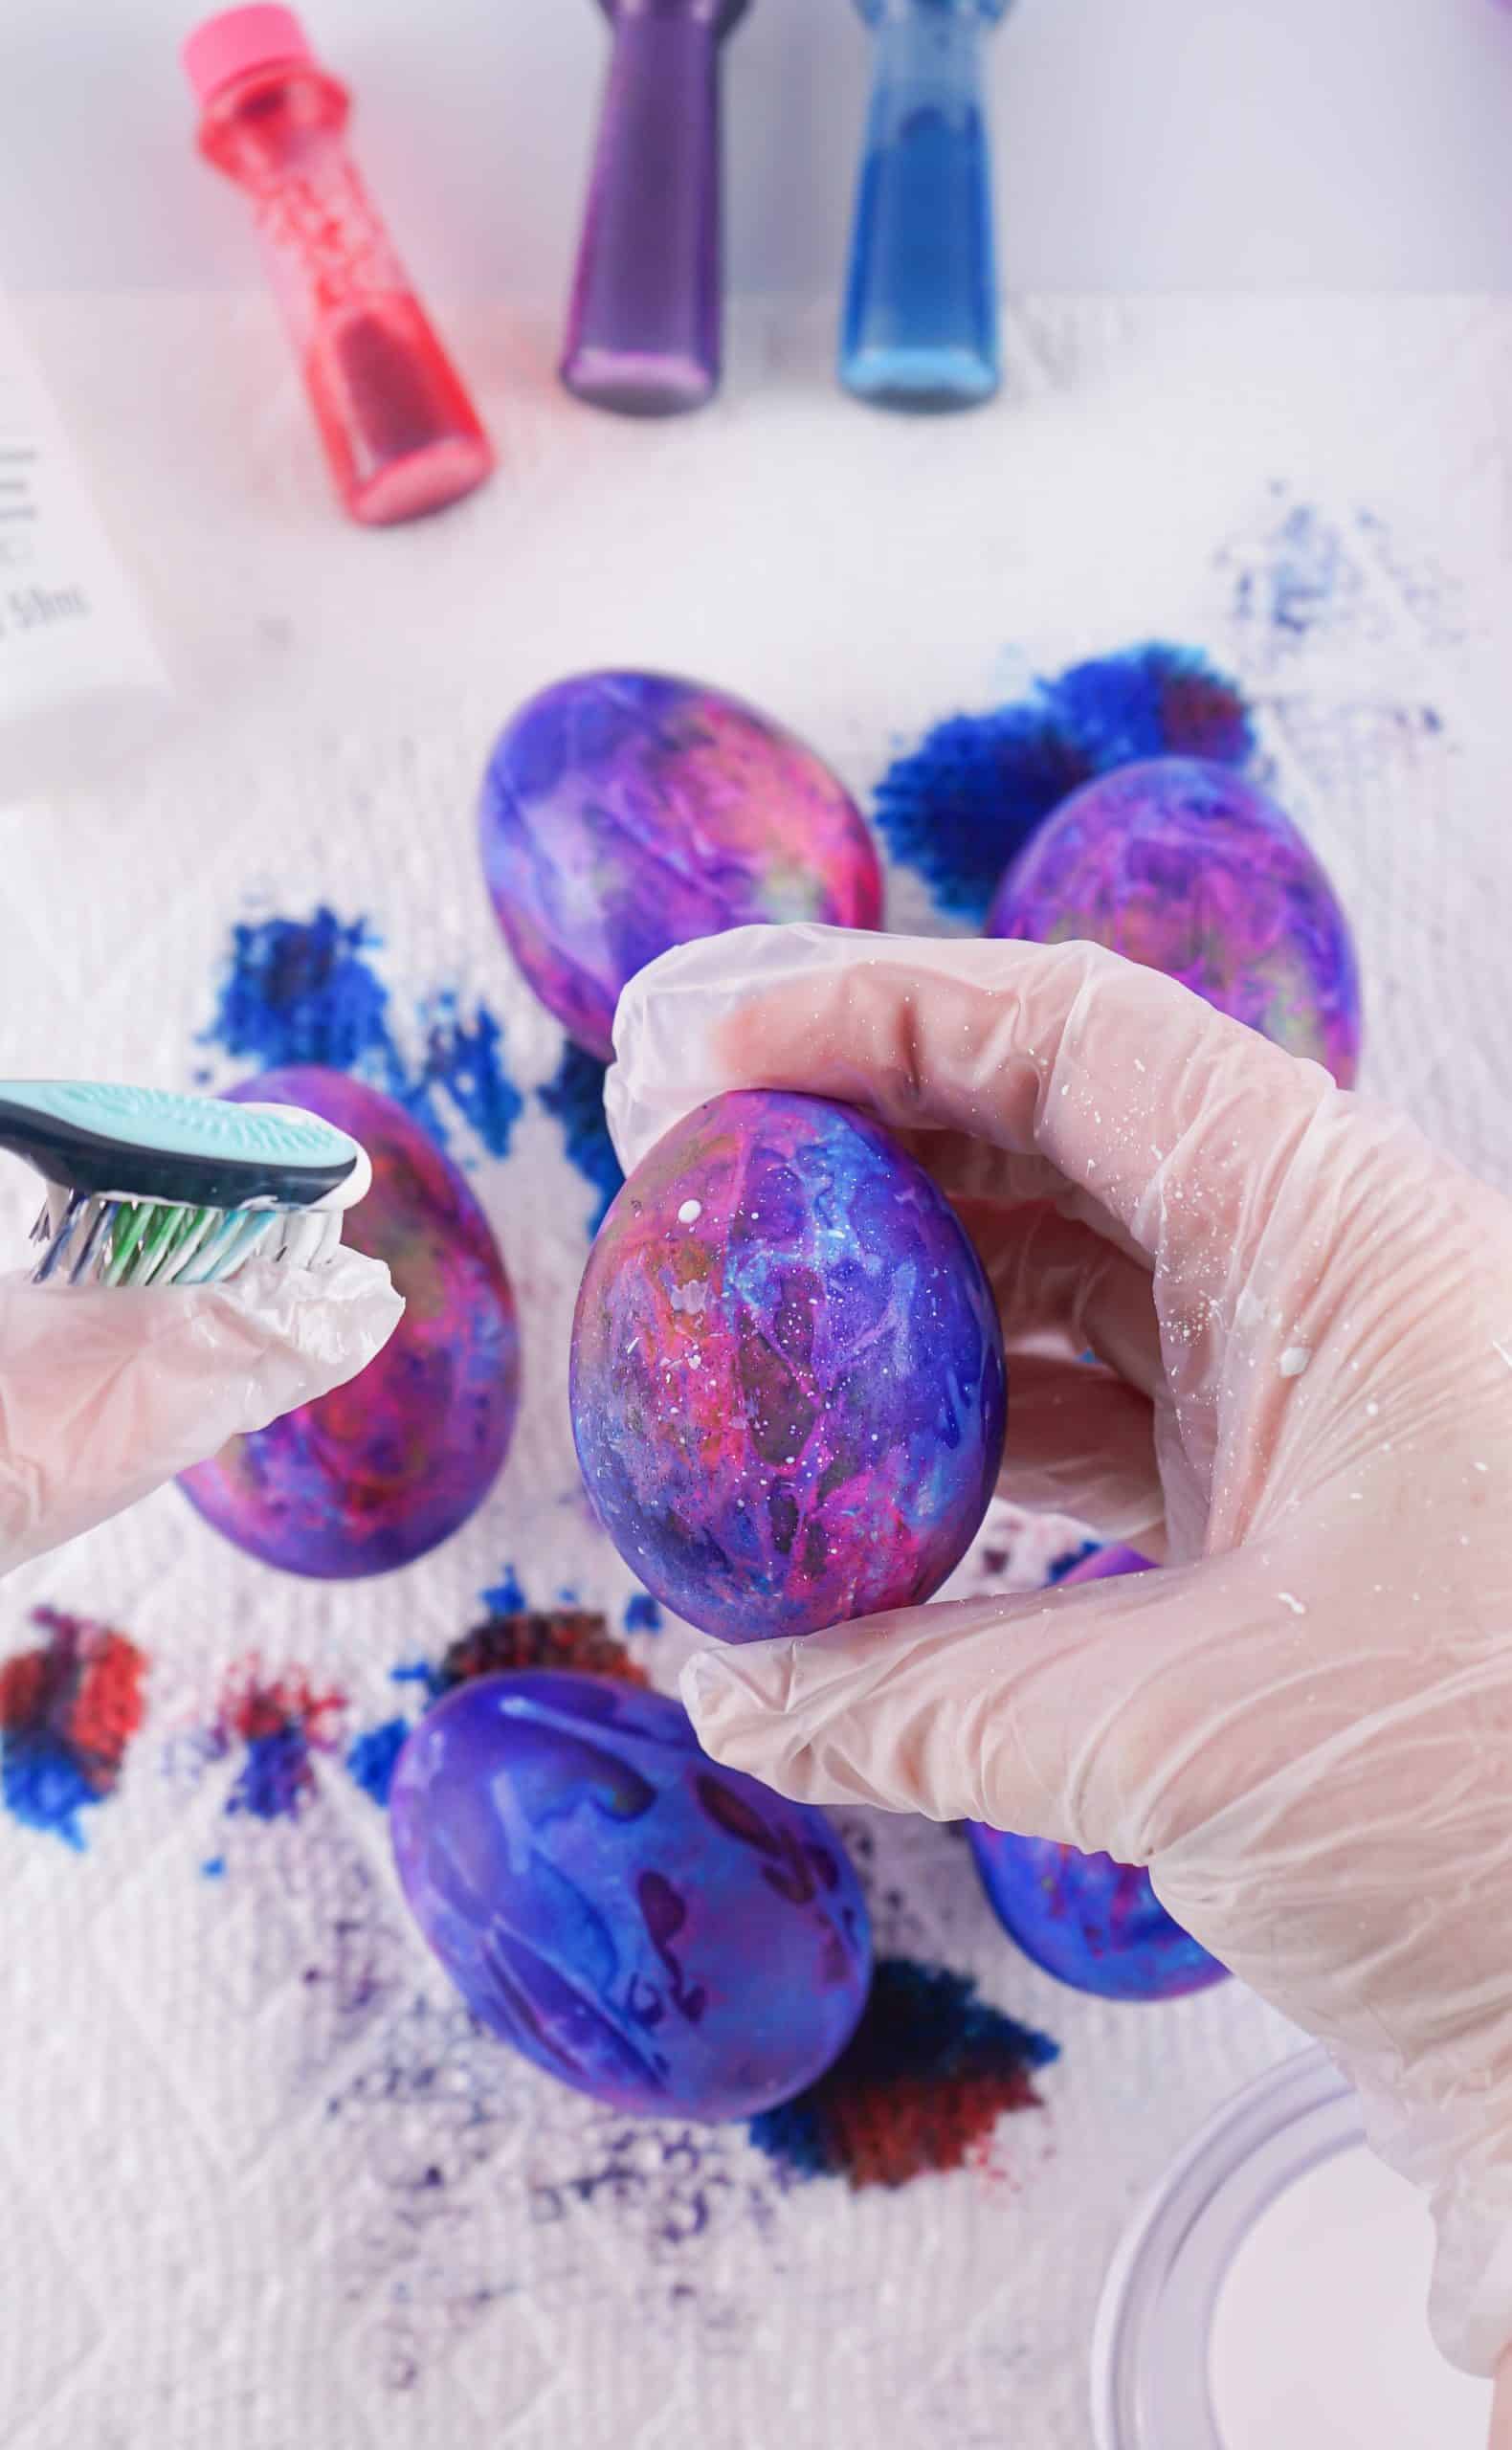 a hand shown flicking white paint from a tooth brush onto dyed easter eggs